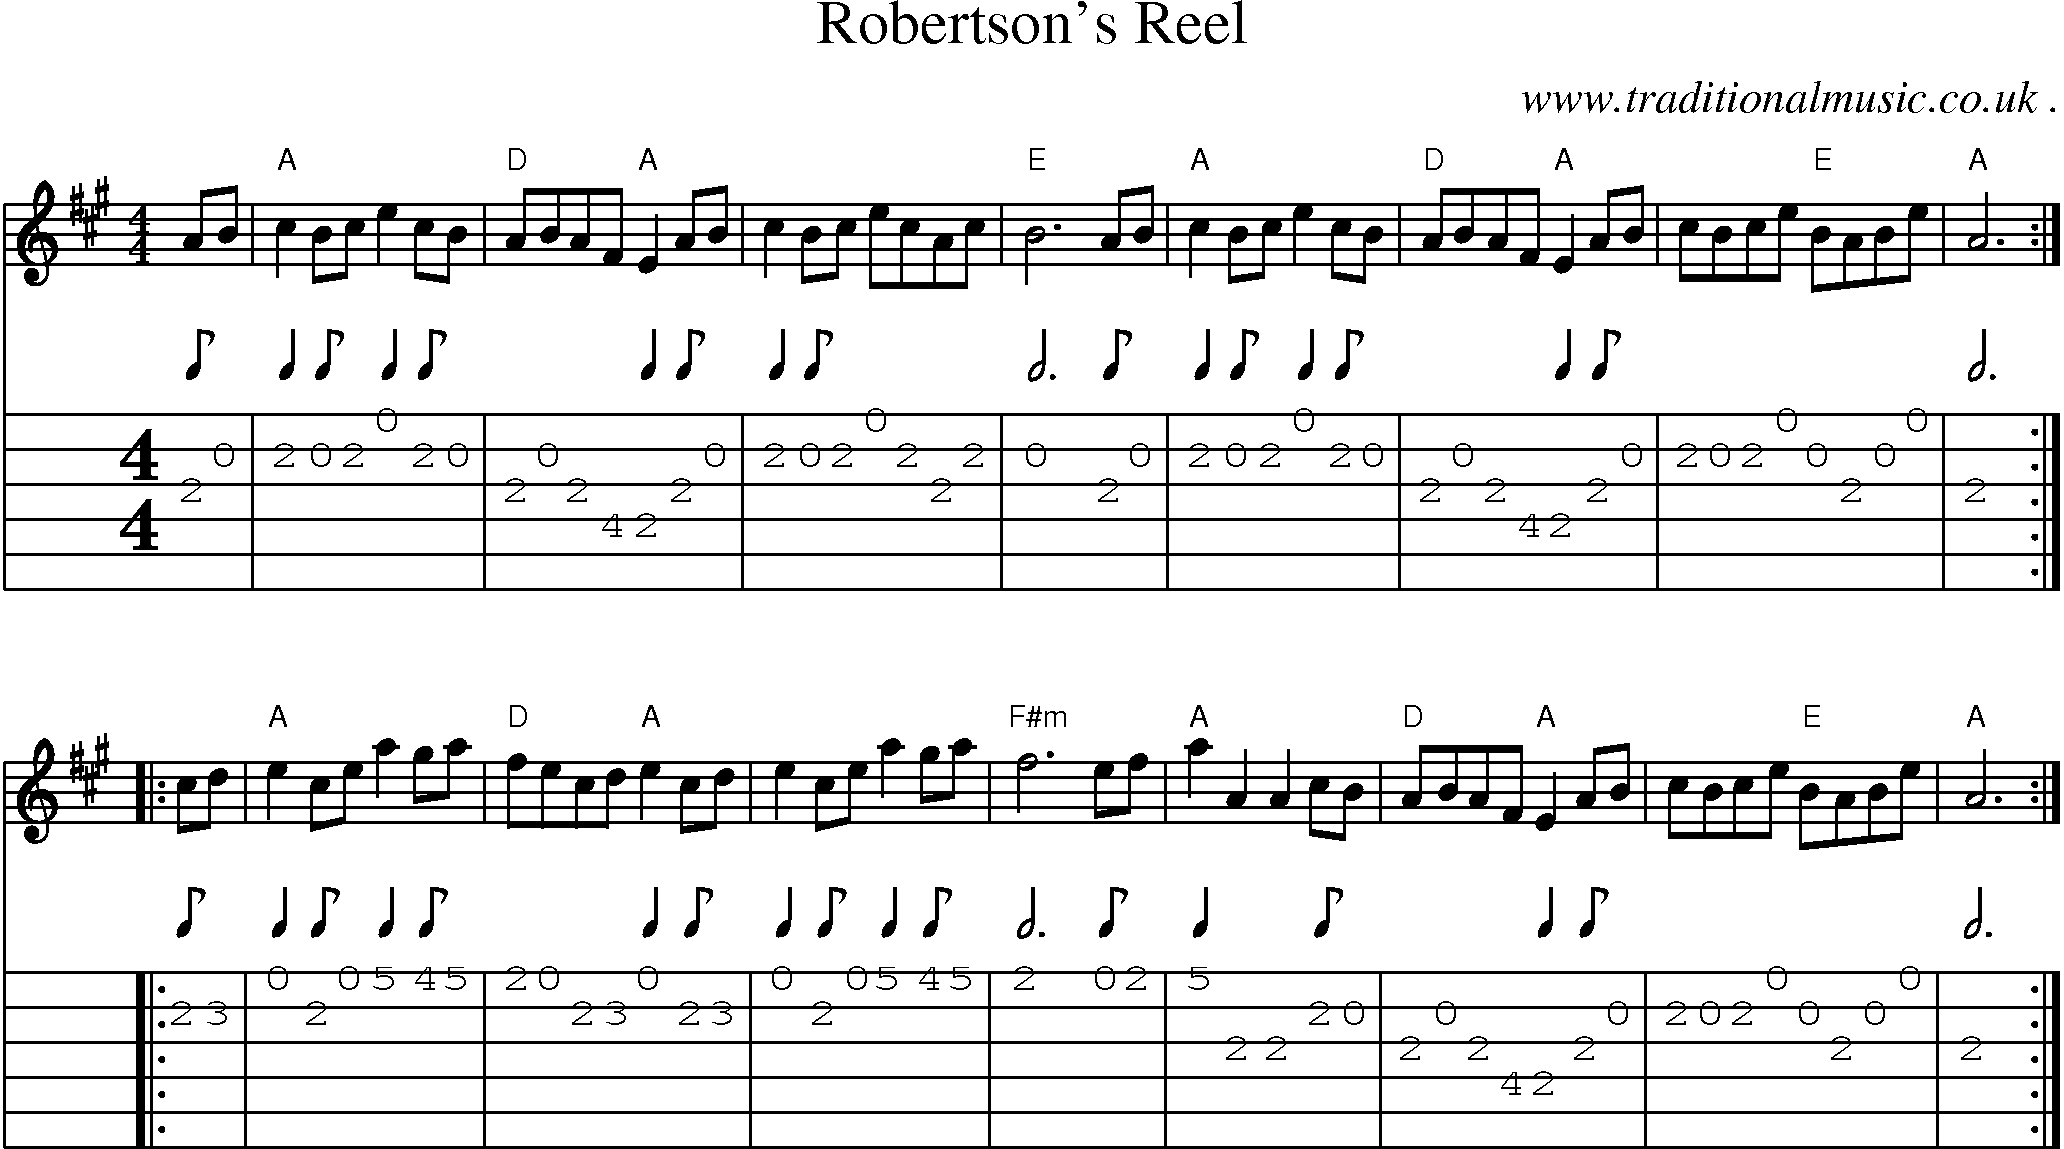 Sheet-music  score, Chords and Guitar Tabs for Robertsons Reel